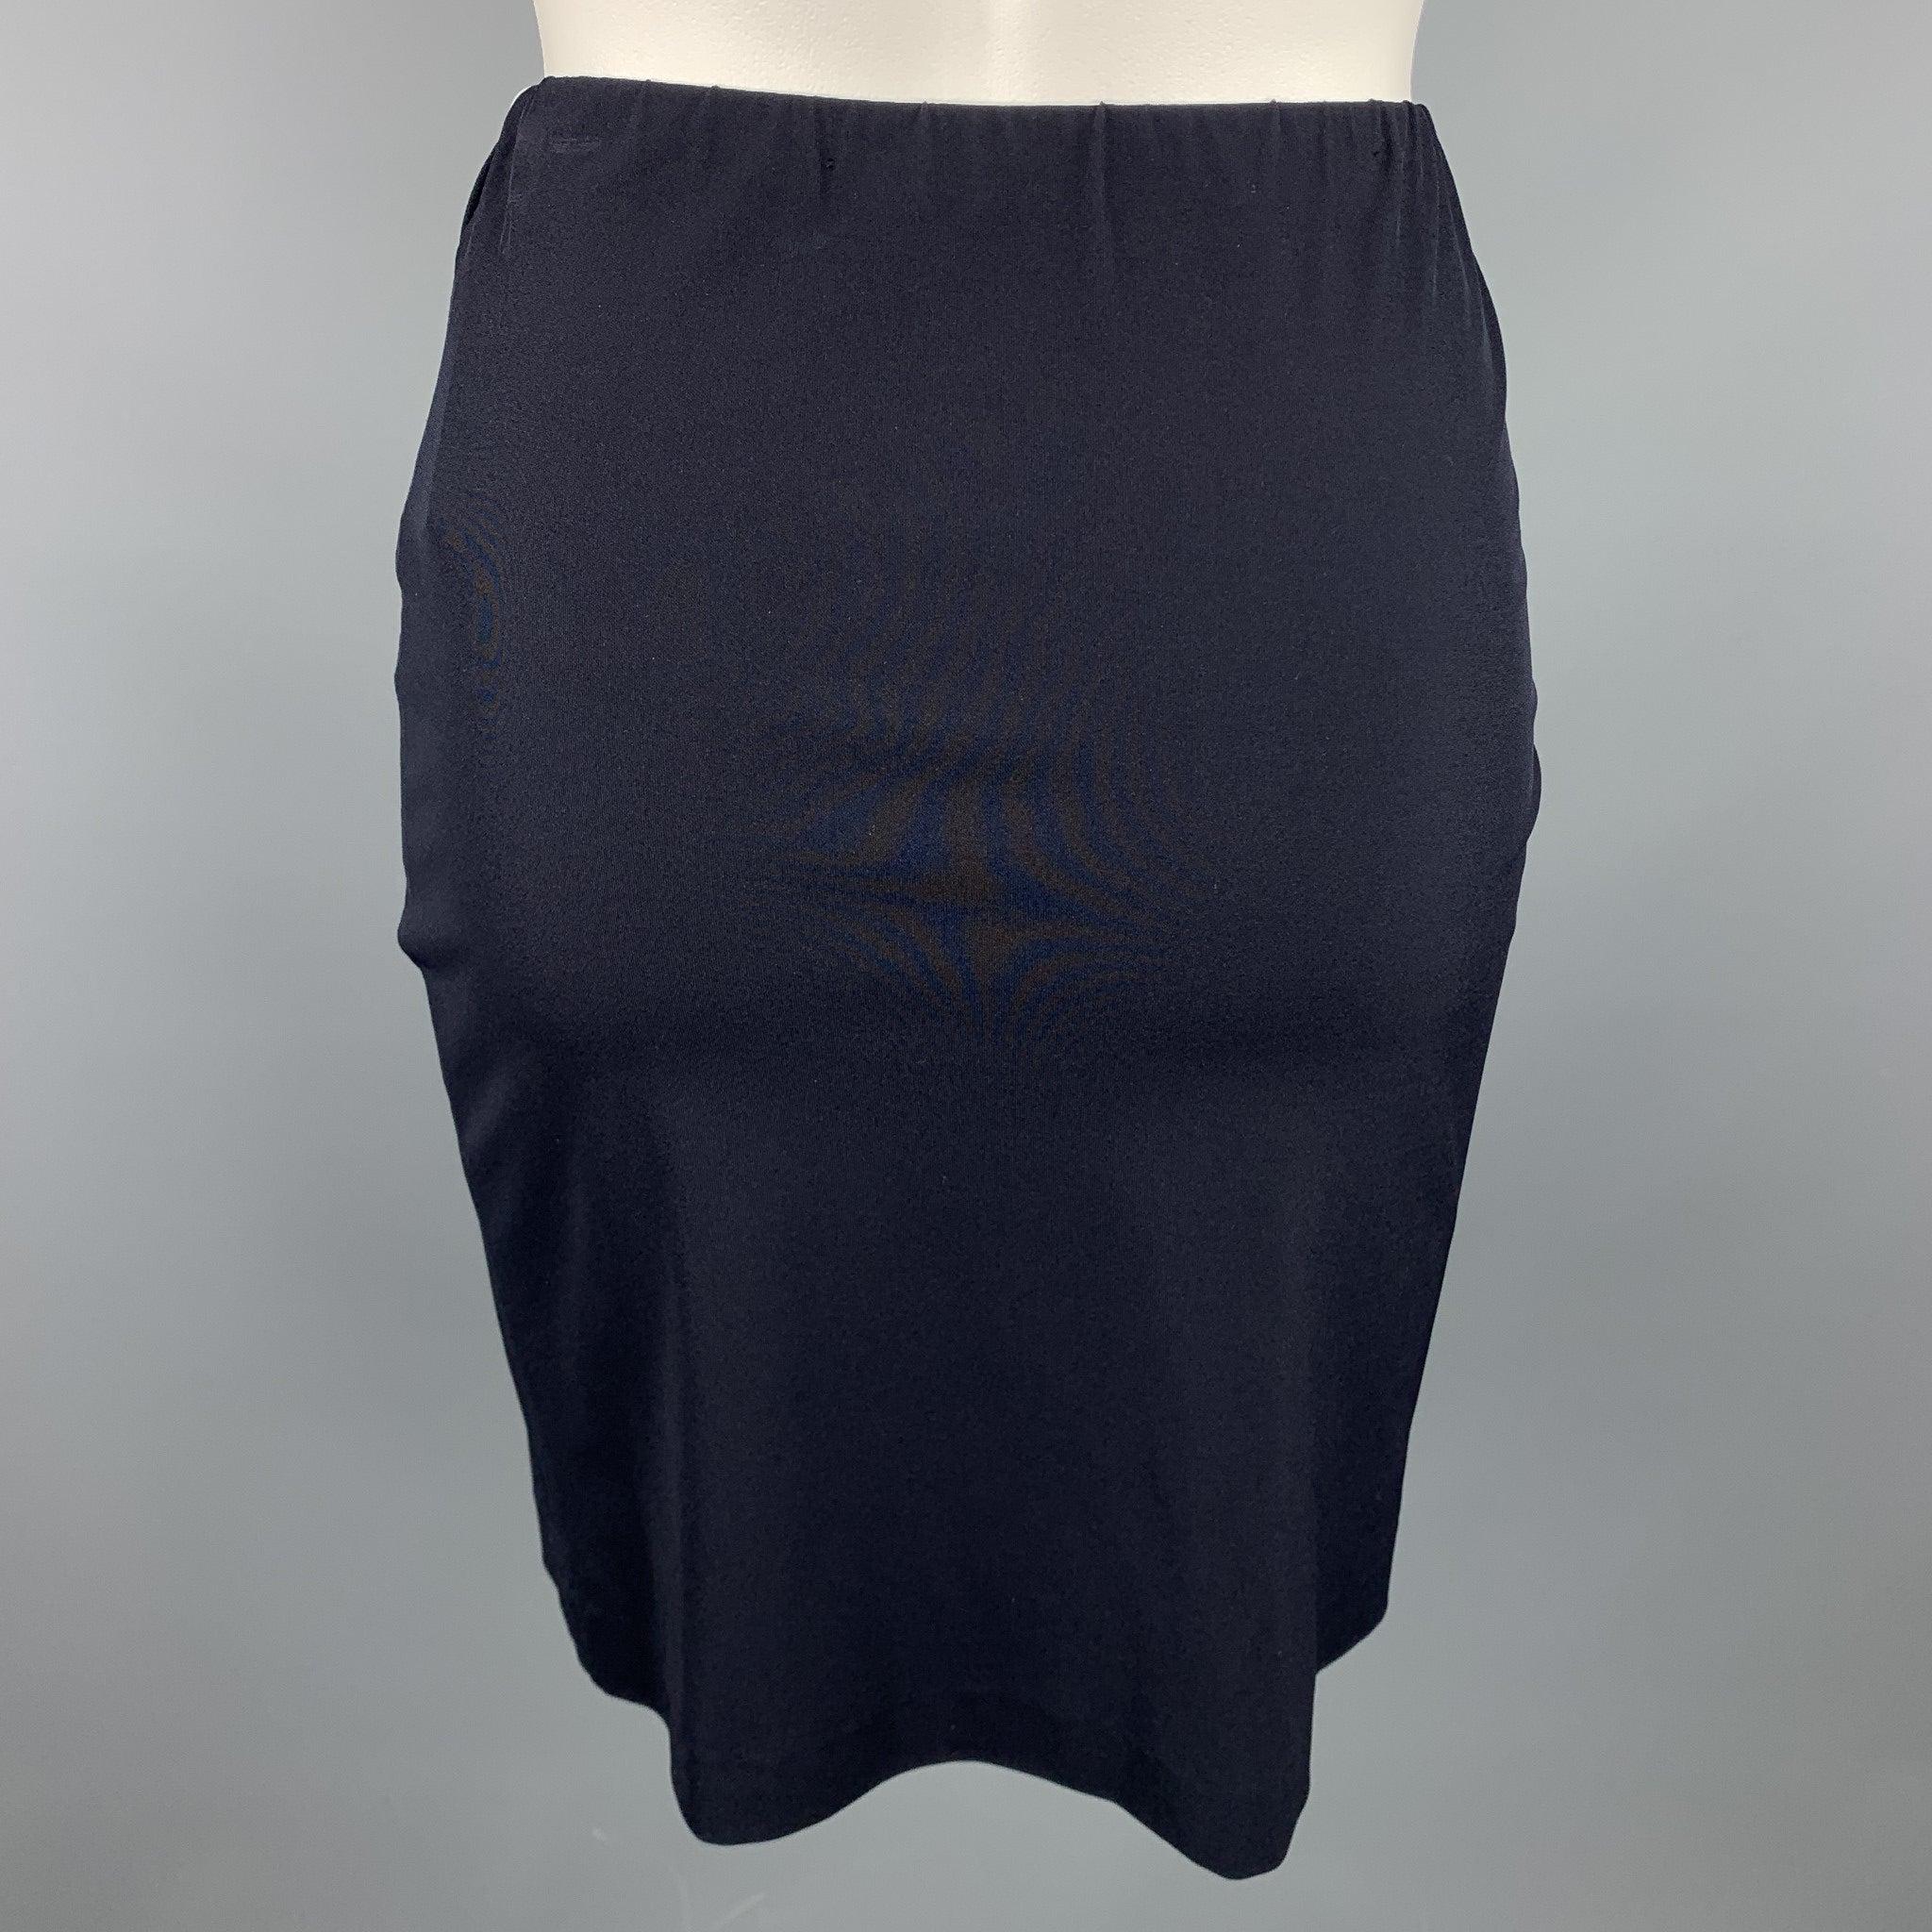 JIL SANDER Size 6 Navy Jersey Elastic Waistband Pencil Skirt In Good Condition For Sale In San Francisco, CA